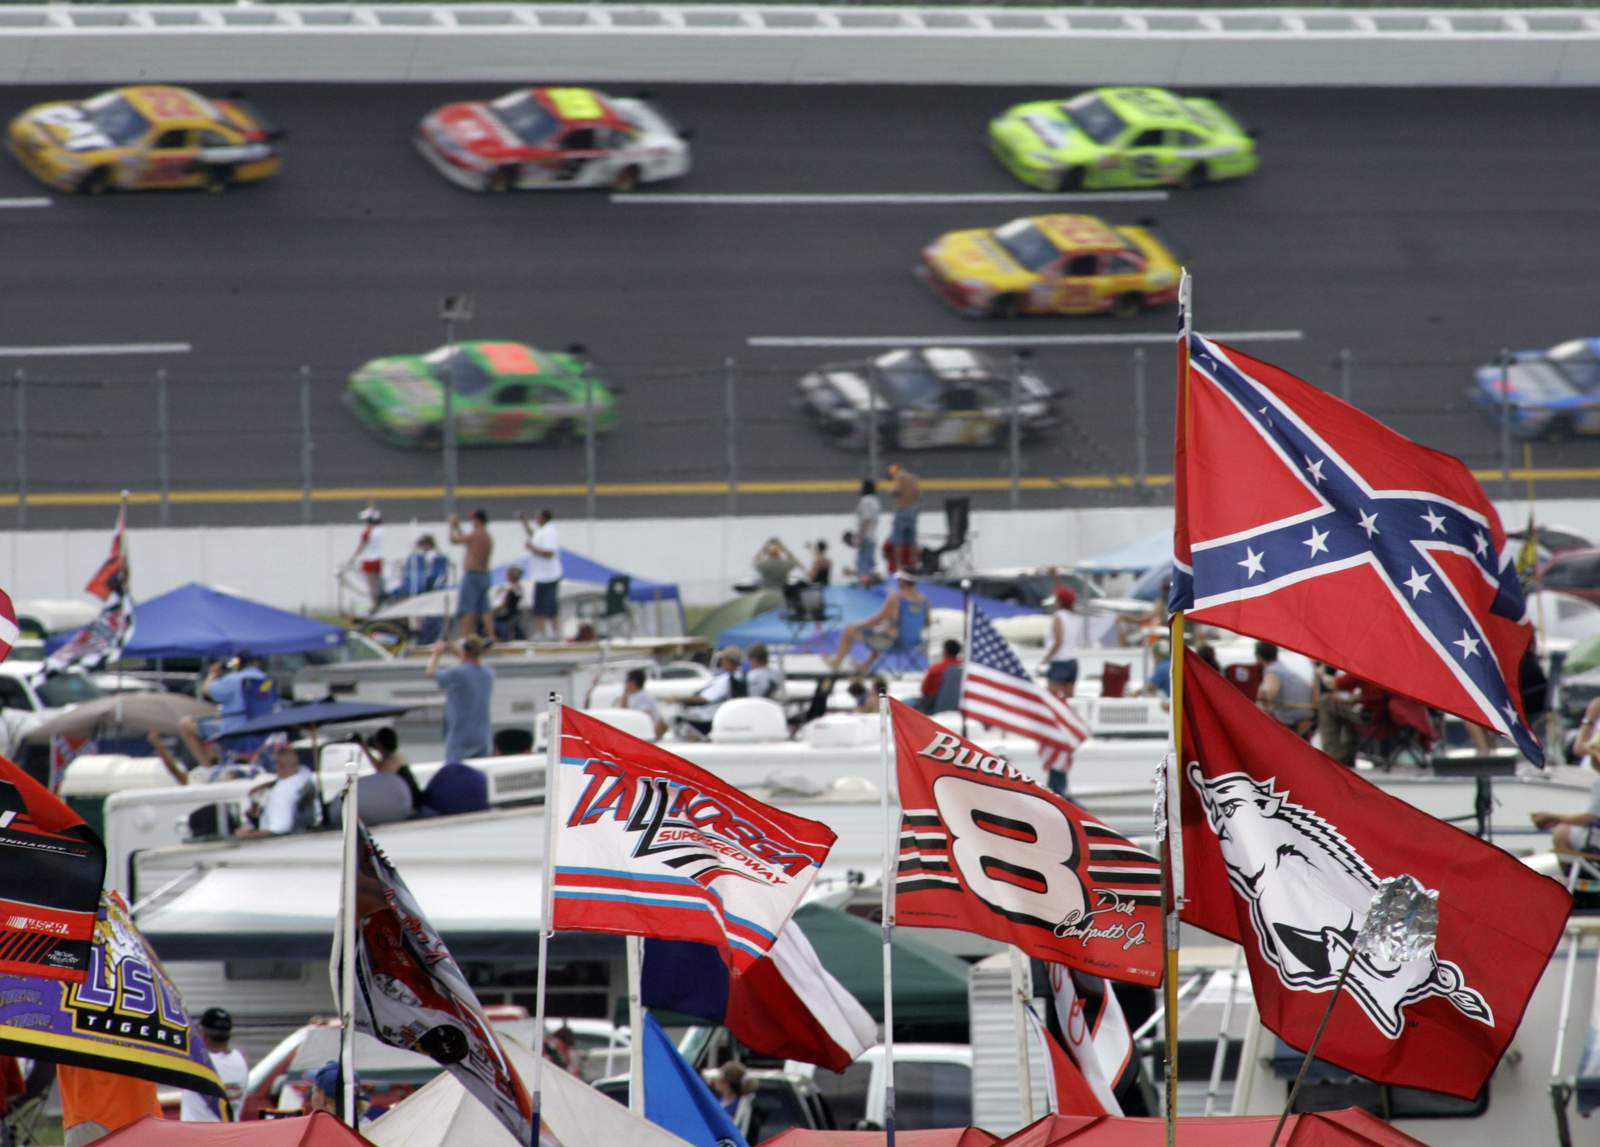 Flag ban fallout: Now comes the tricky part for NASCAR